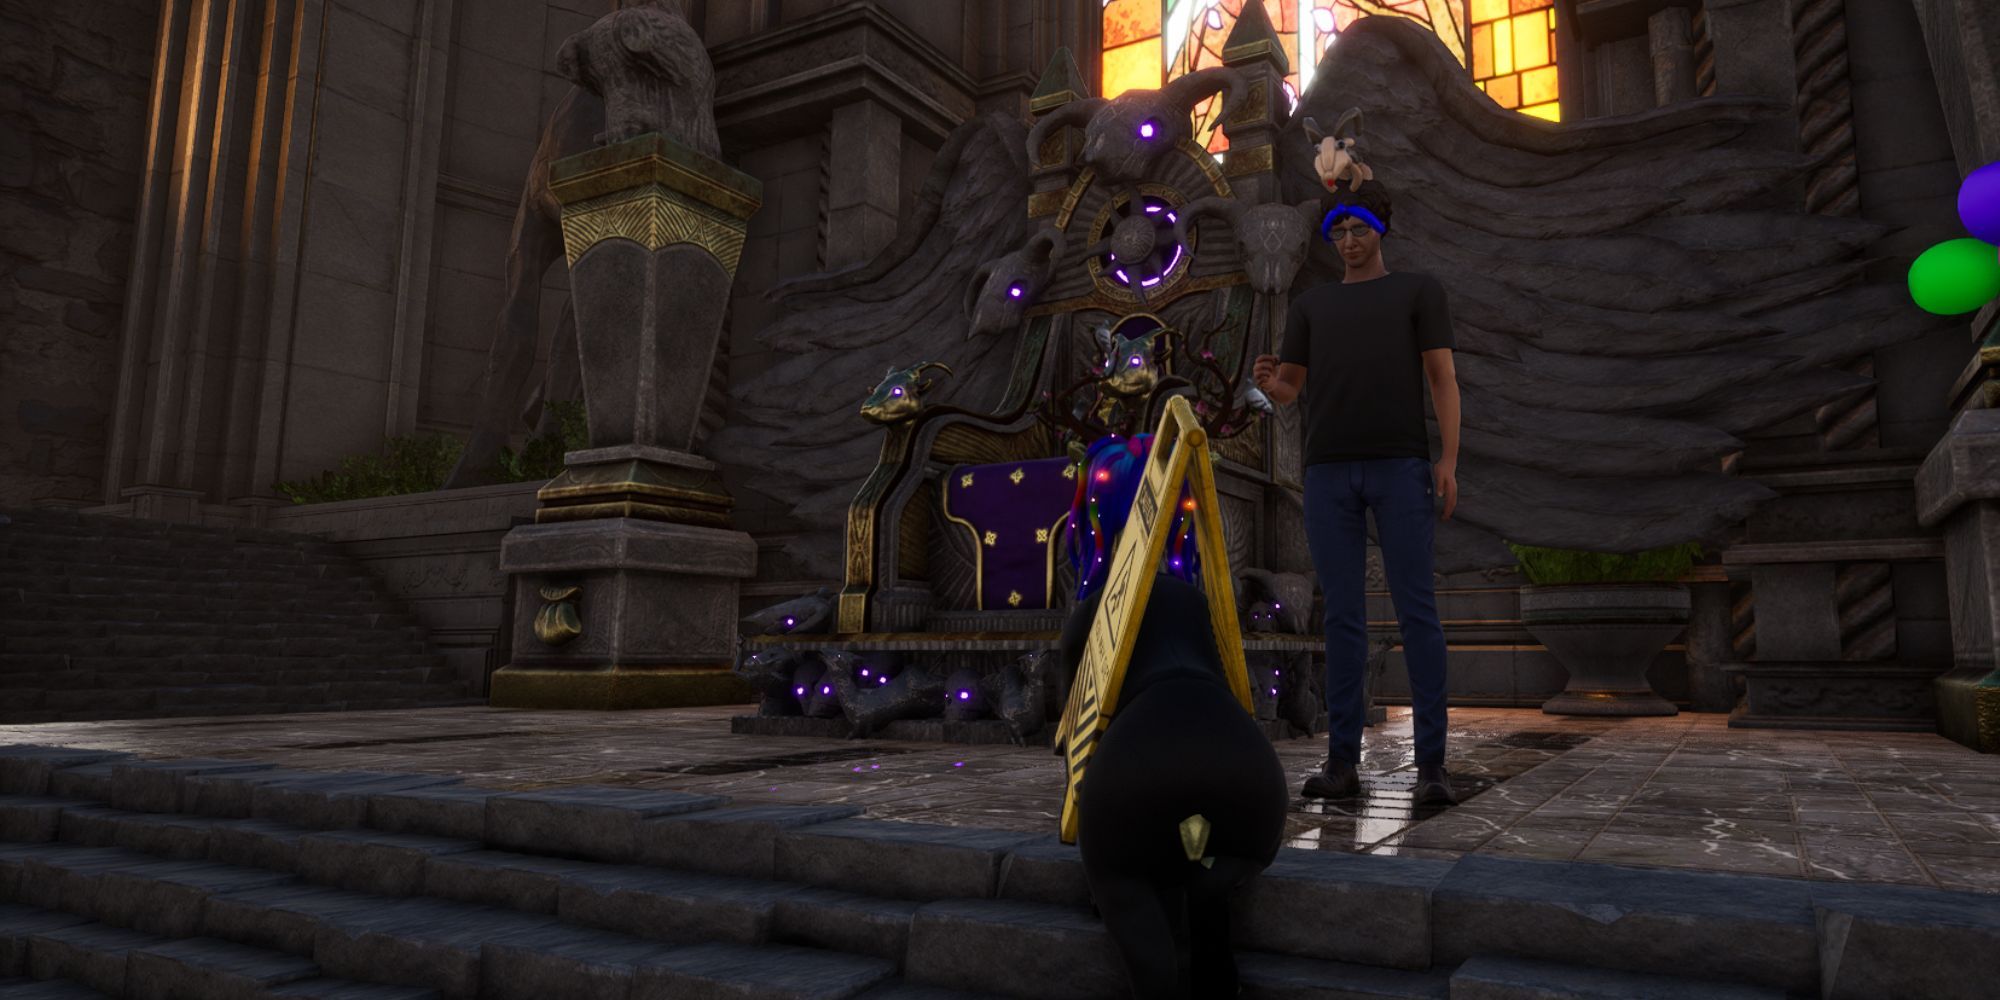 Pilgor faces Philip's character as he stands in front of the throne wearing a balloon animal hat